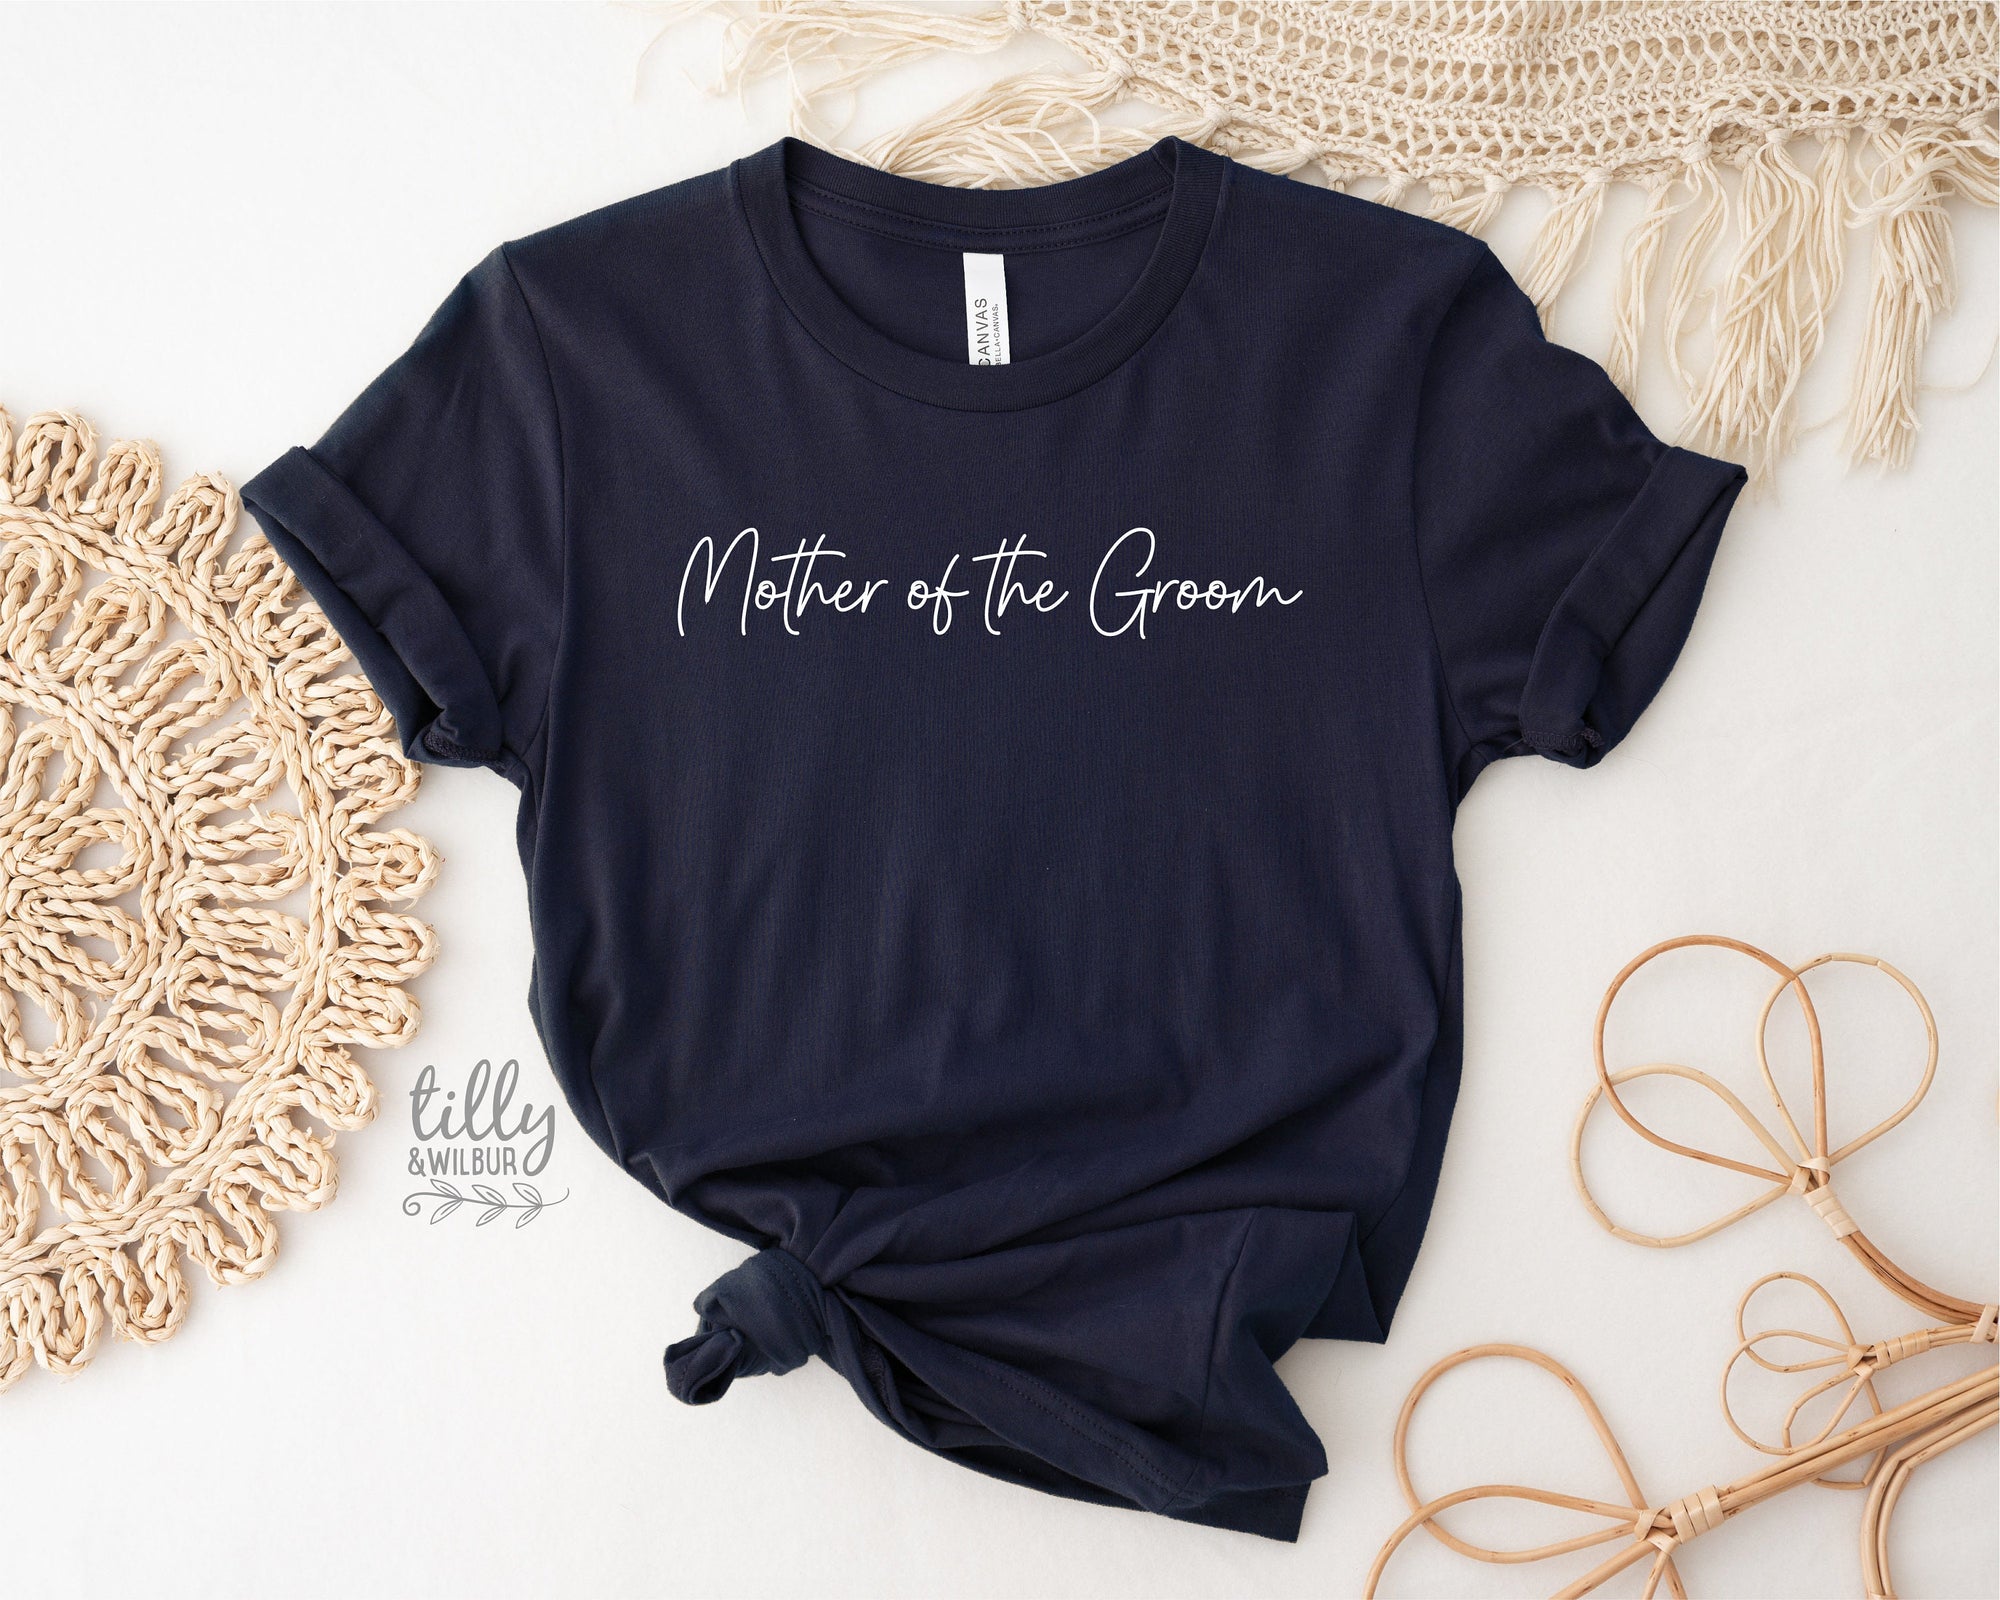 Mother Of The Groom T-Shirt, Bride Tribe T-Shirt, Bridesmaids T-Shirt, Matching Bridal Party Gifts, Wedding Gift, Hens Party Shirts, Groom